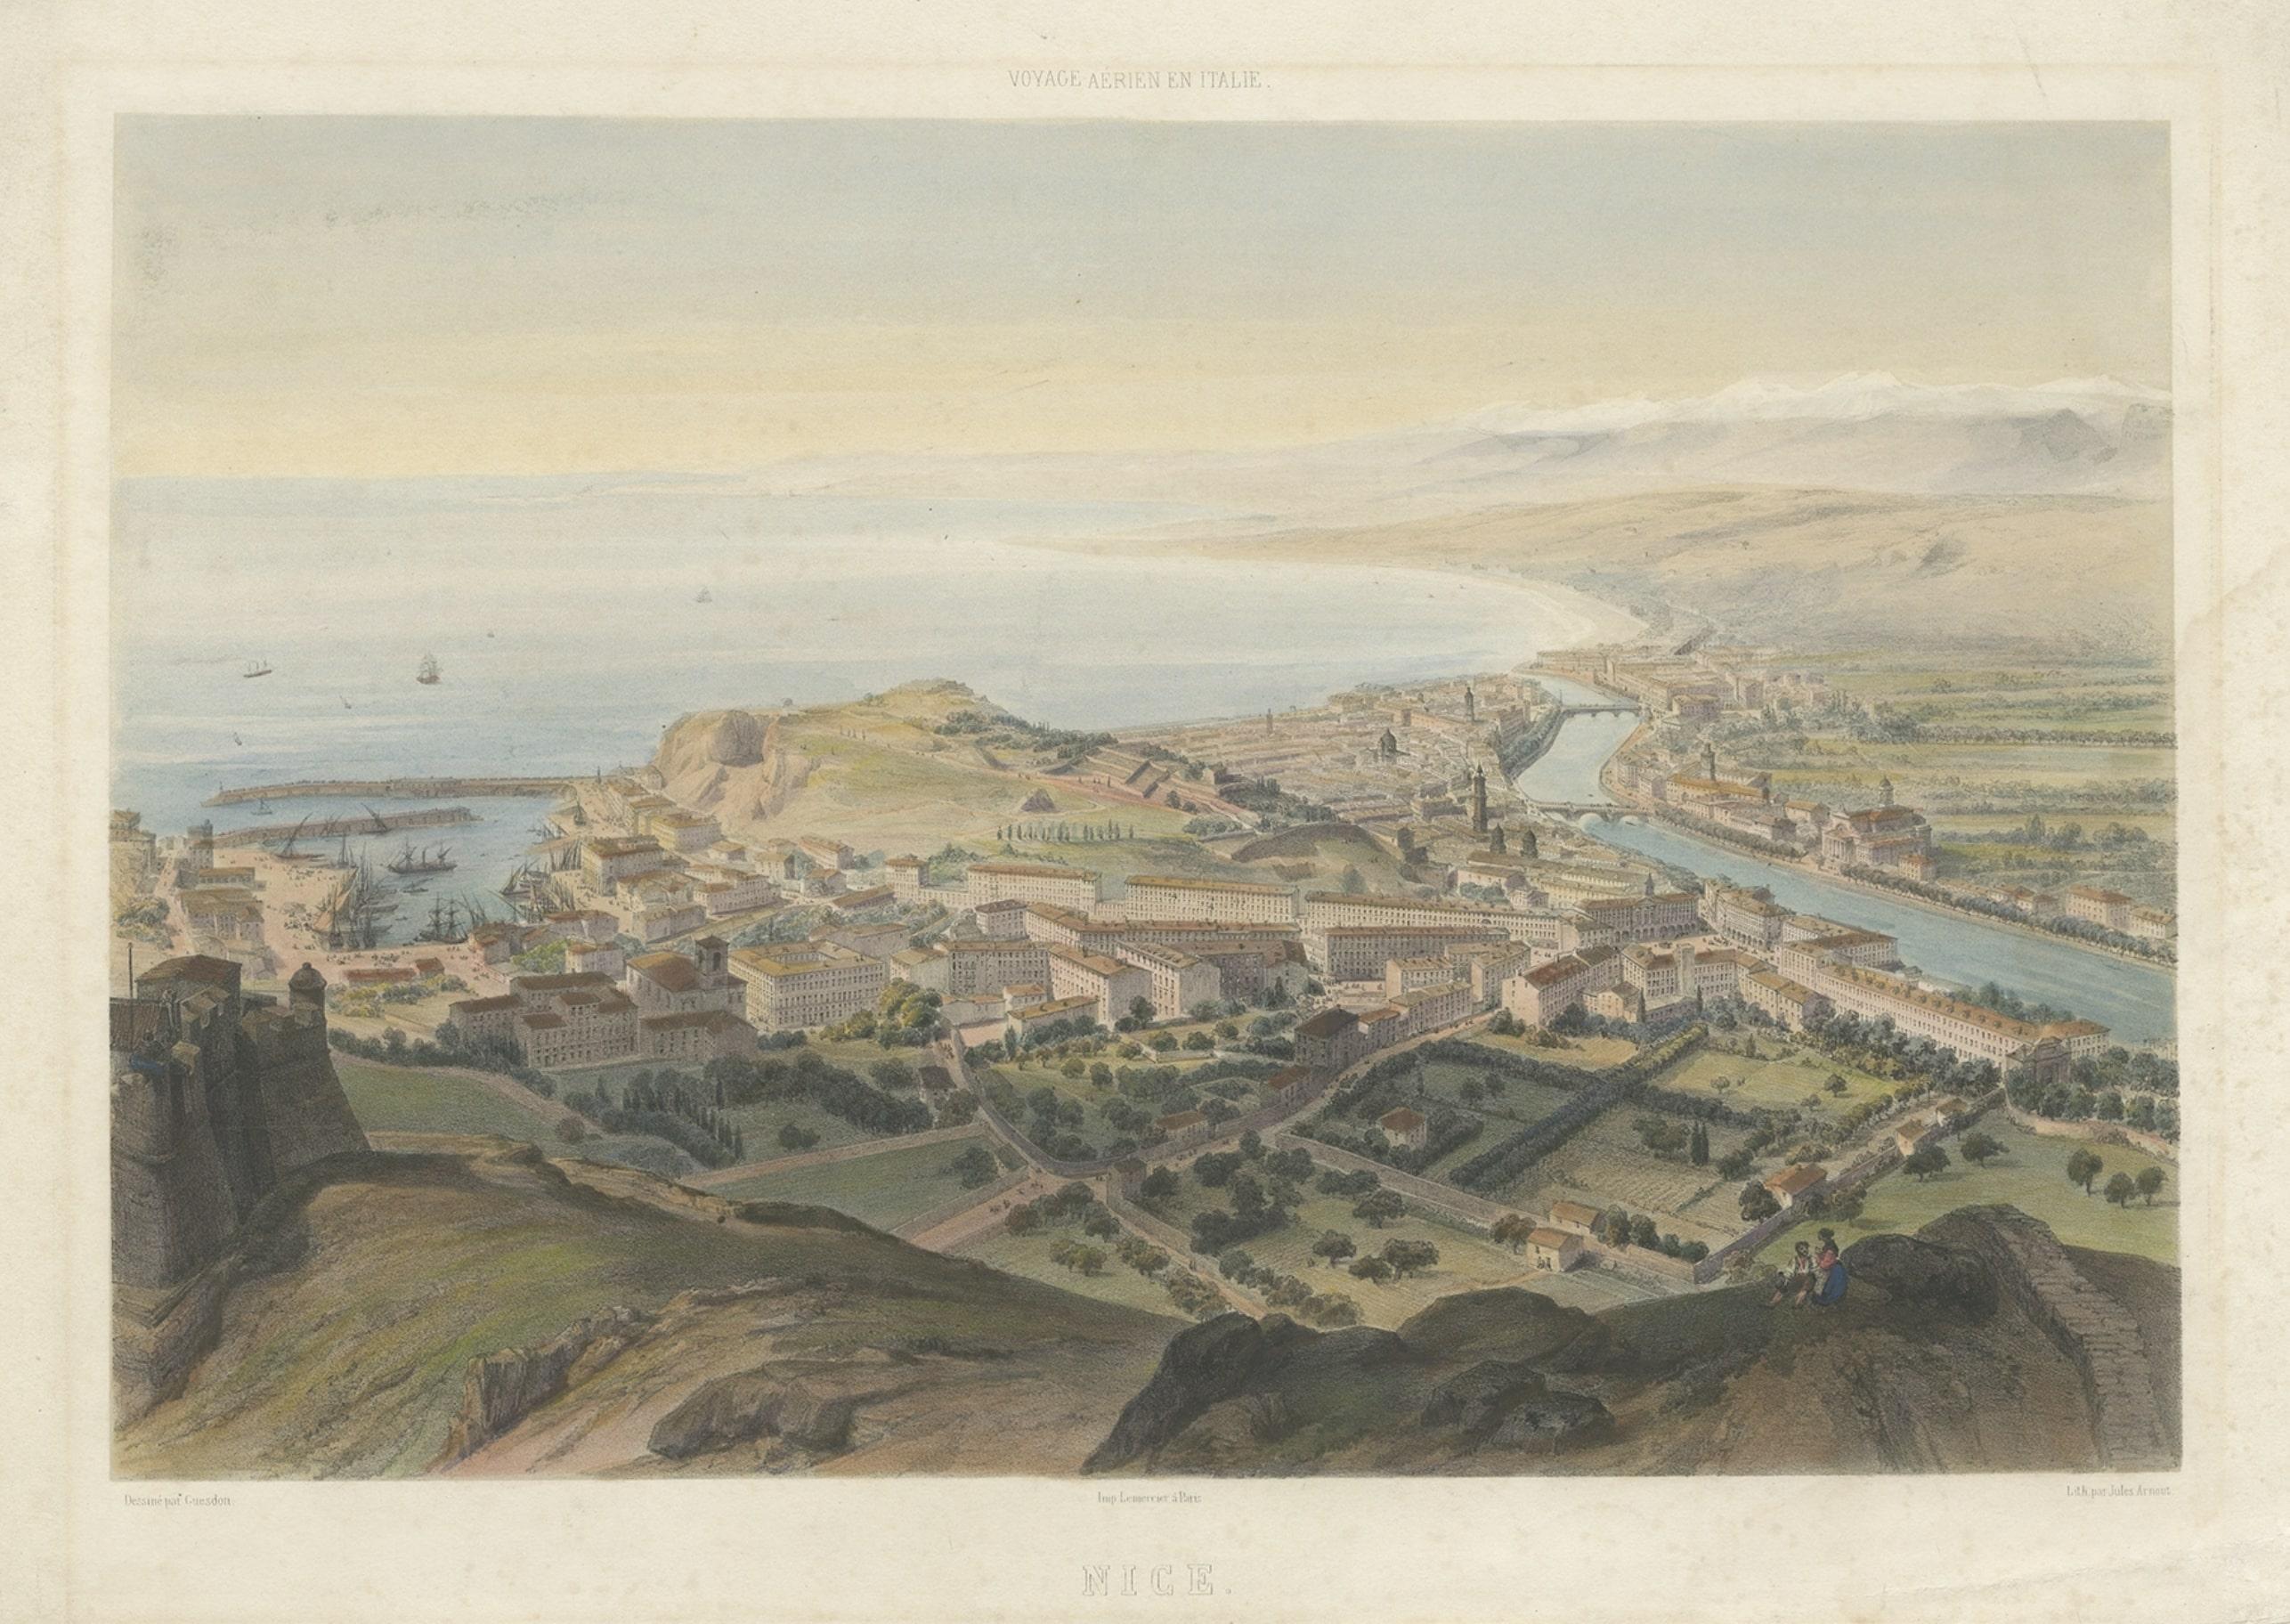 Paper Large Decorative Antique Print with a View of Nice in Southern France, c.1850 For Sale